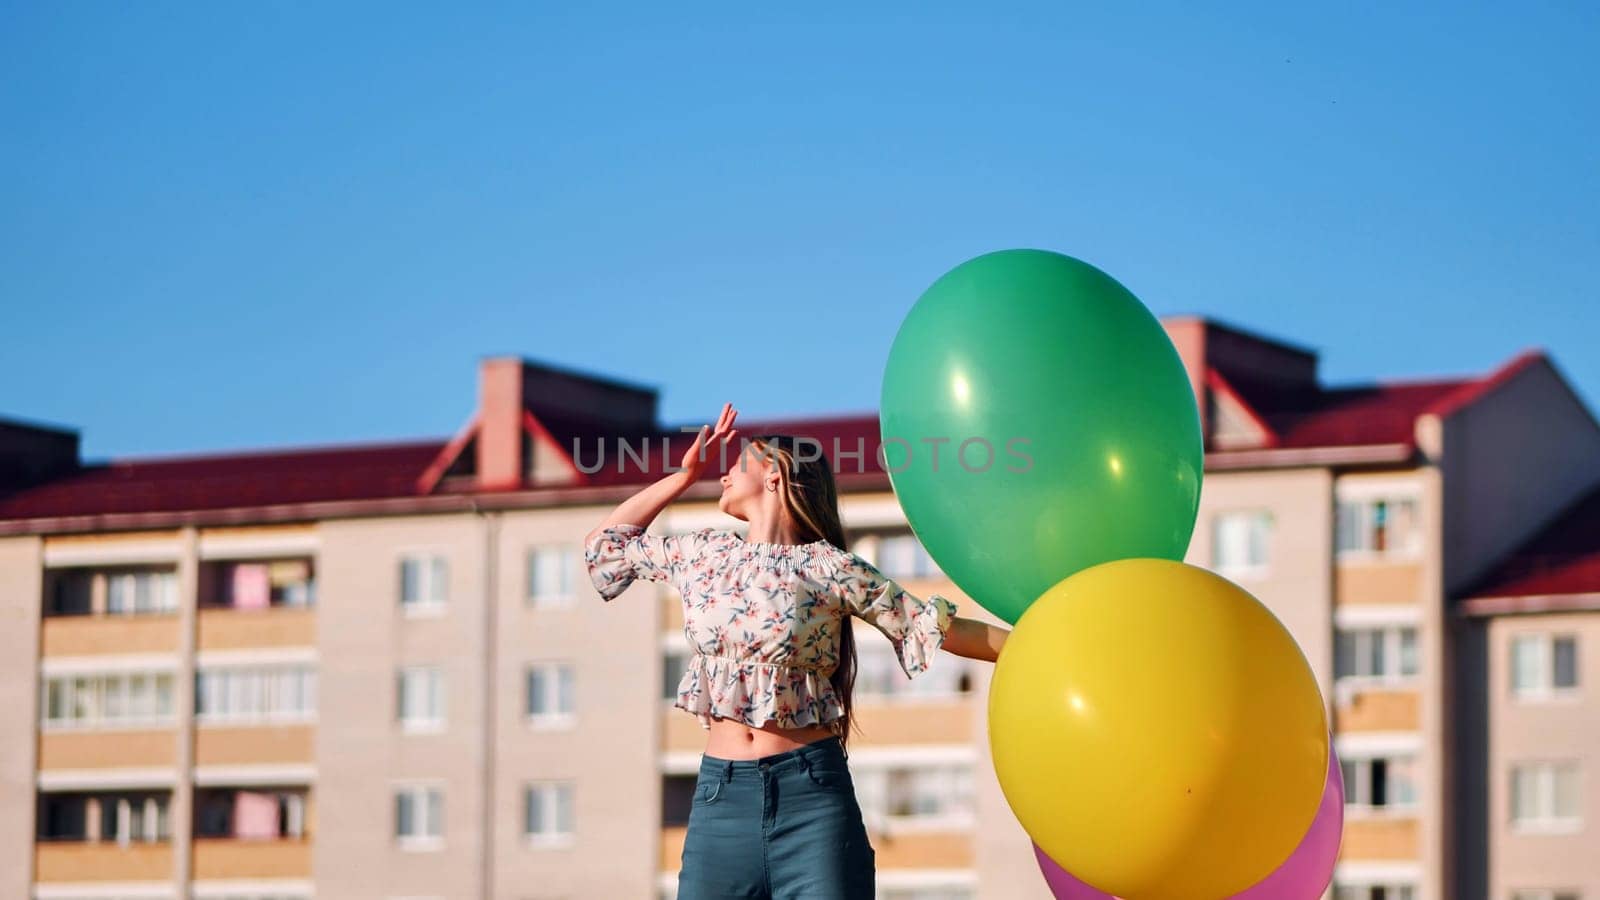 A girl happily poses with large with colorful balloons in the city